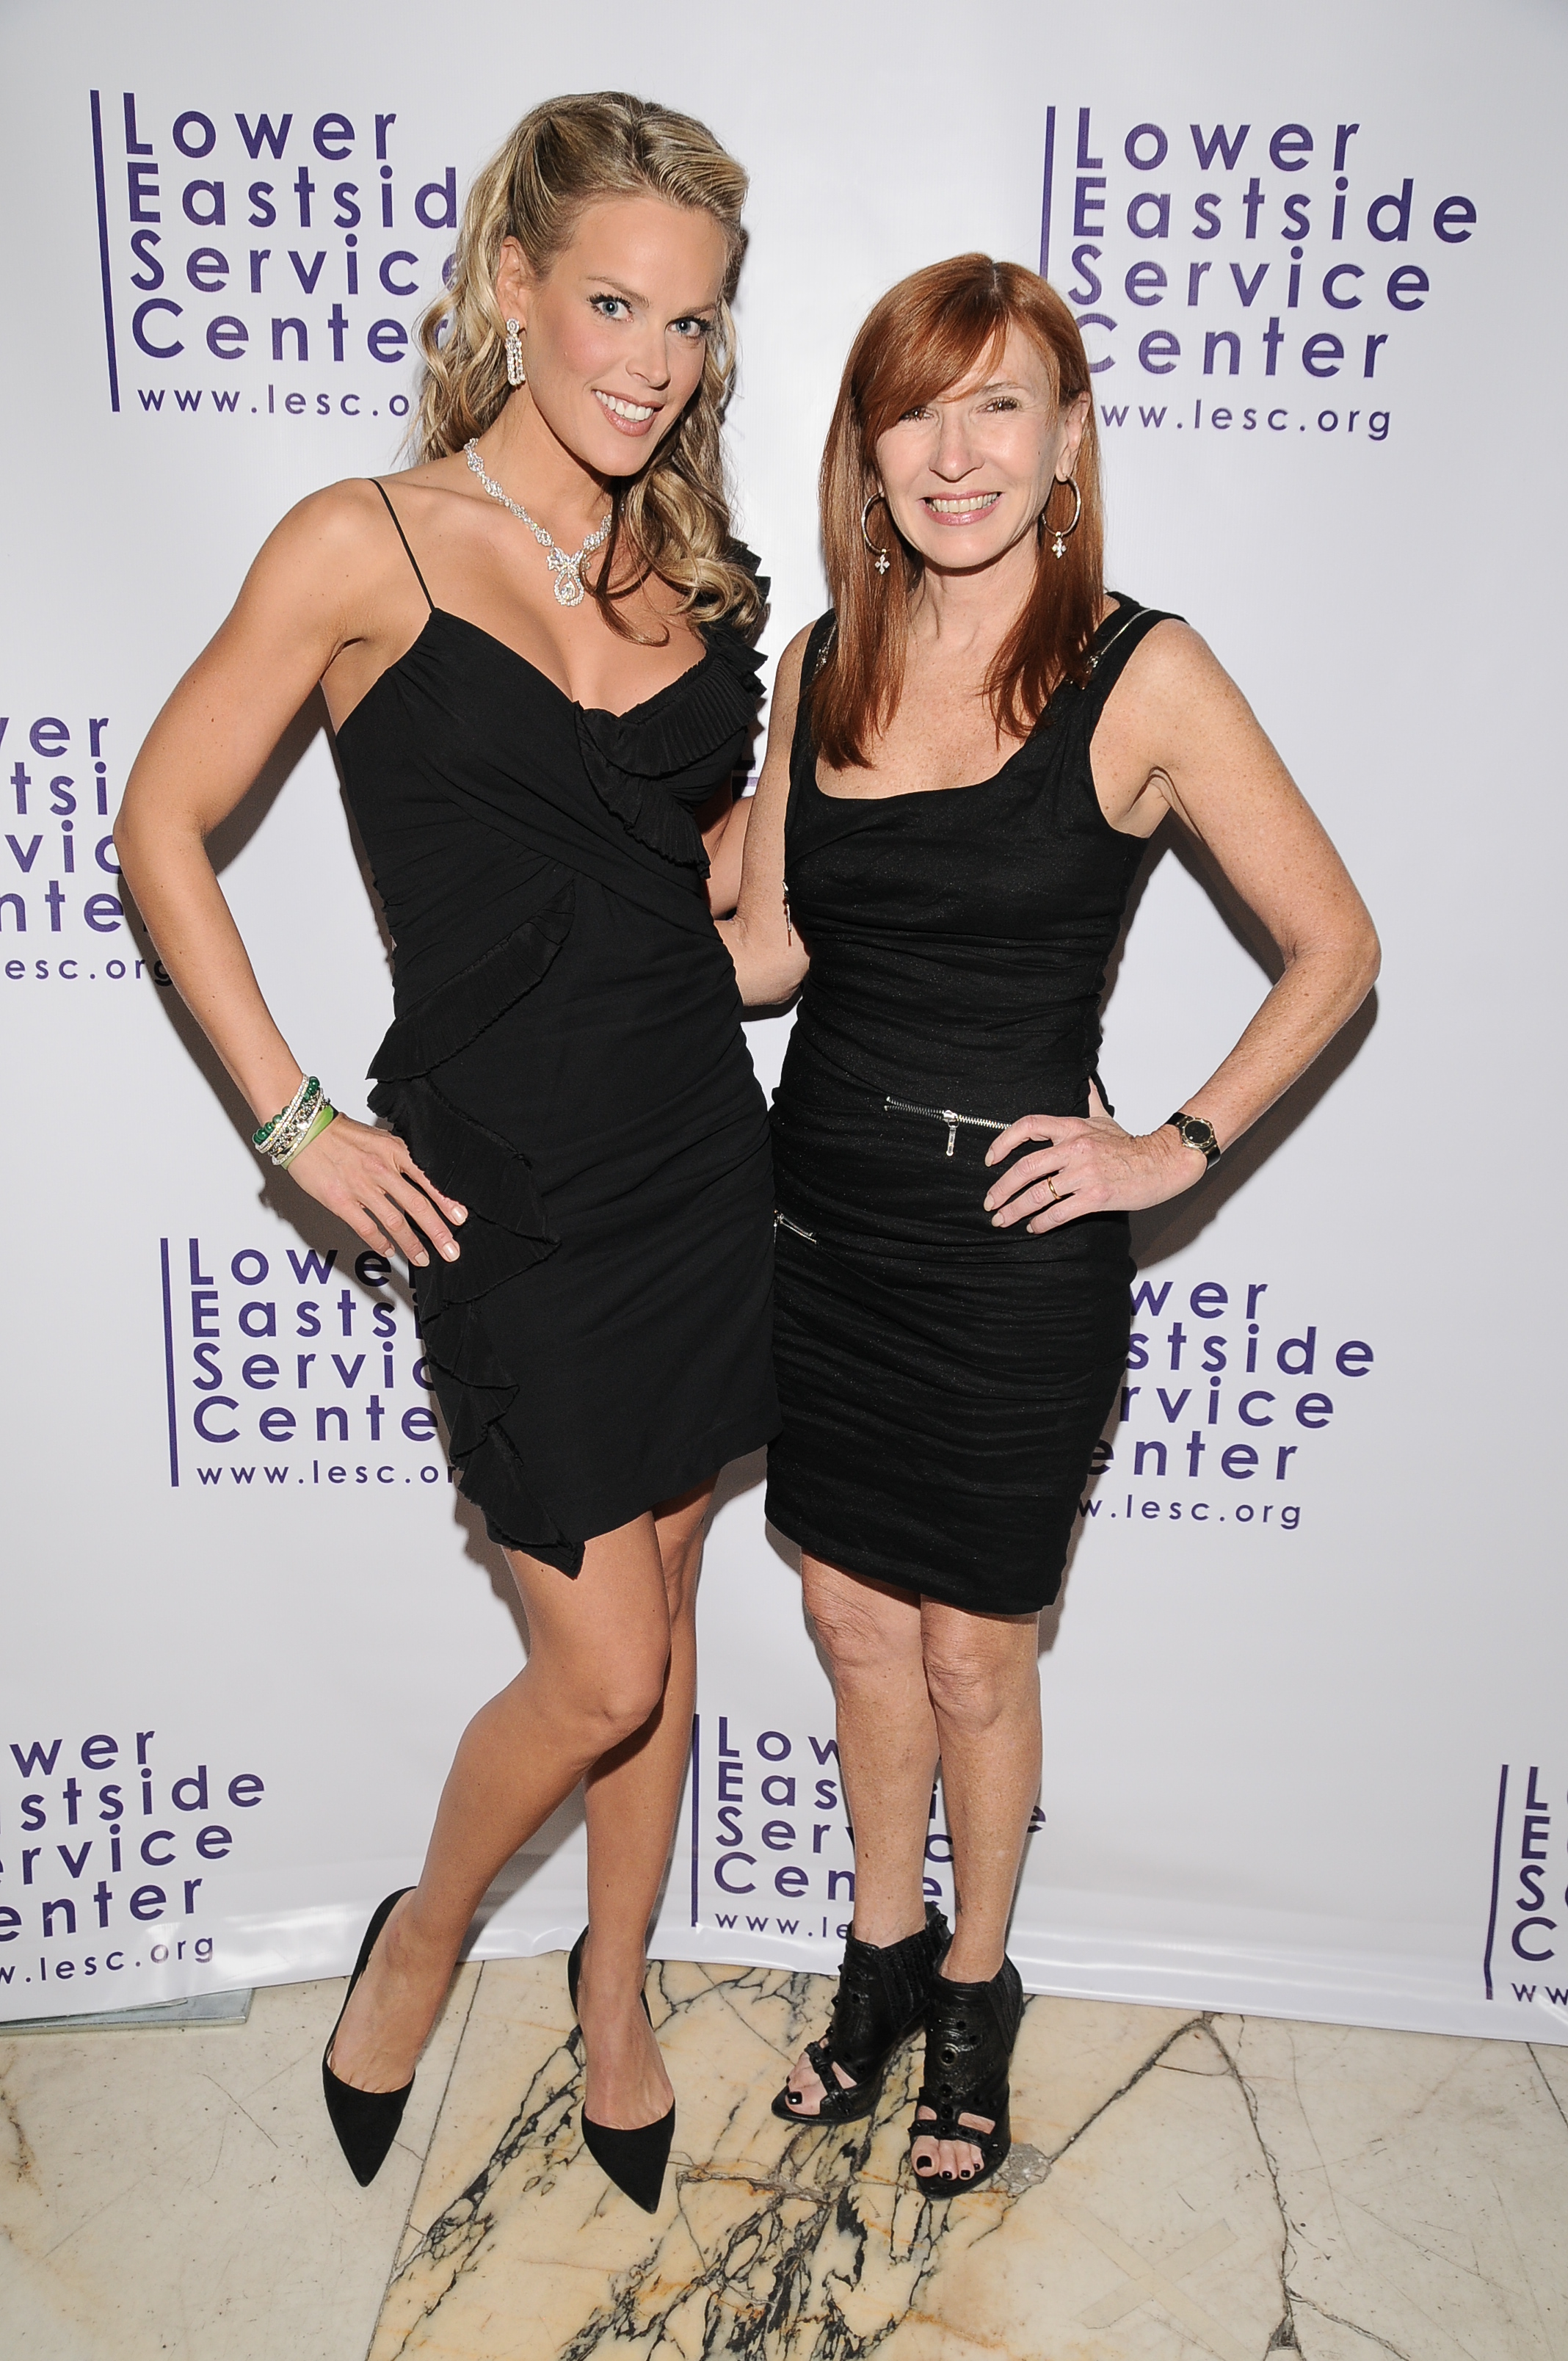 Heidi Albertsen and Nicole Miller at the Lower Eastside Service Center gala in May, 2010 in New York City.